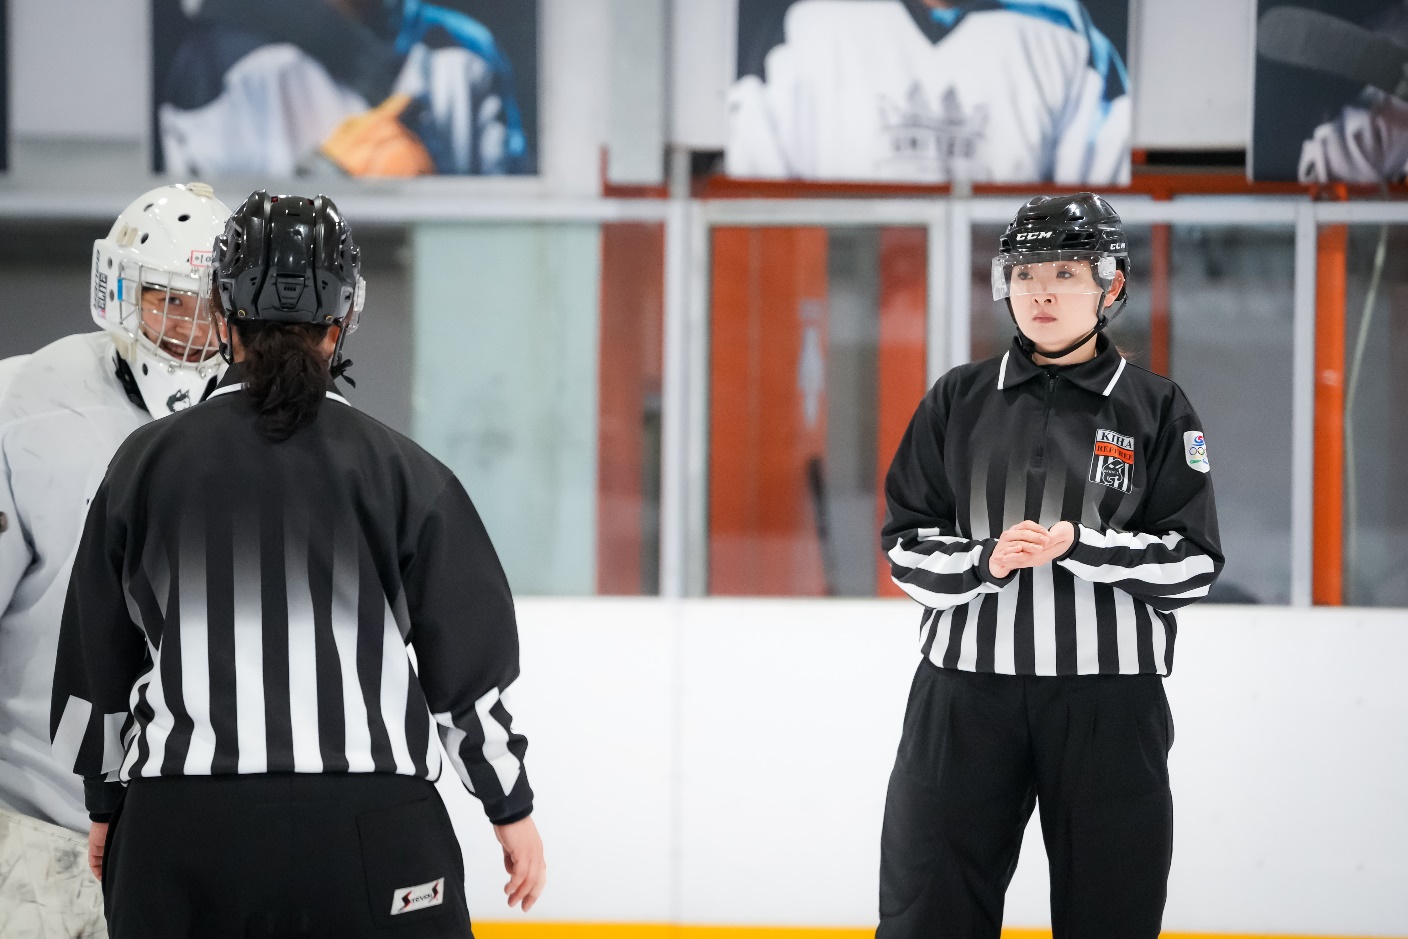 Photo: Female referees in charge of a Dream League hockey game